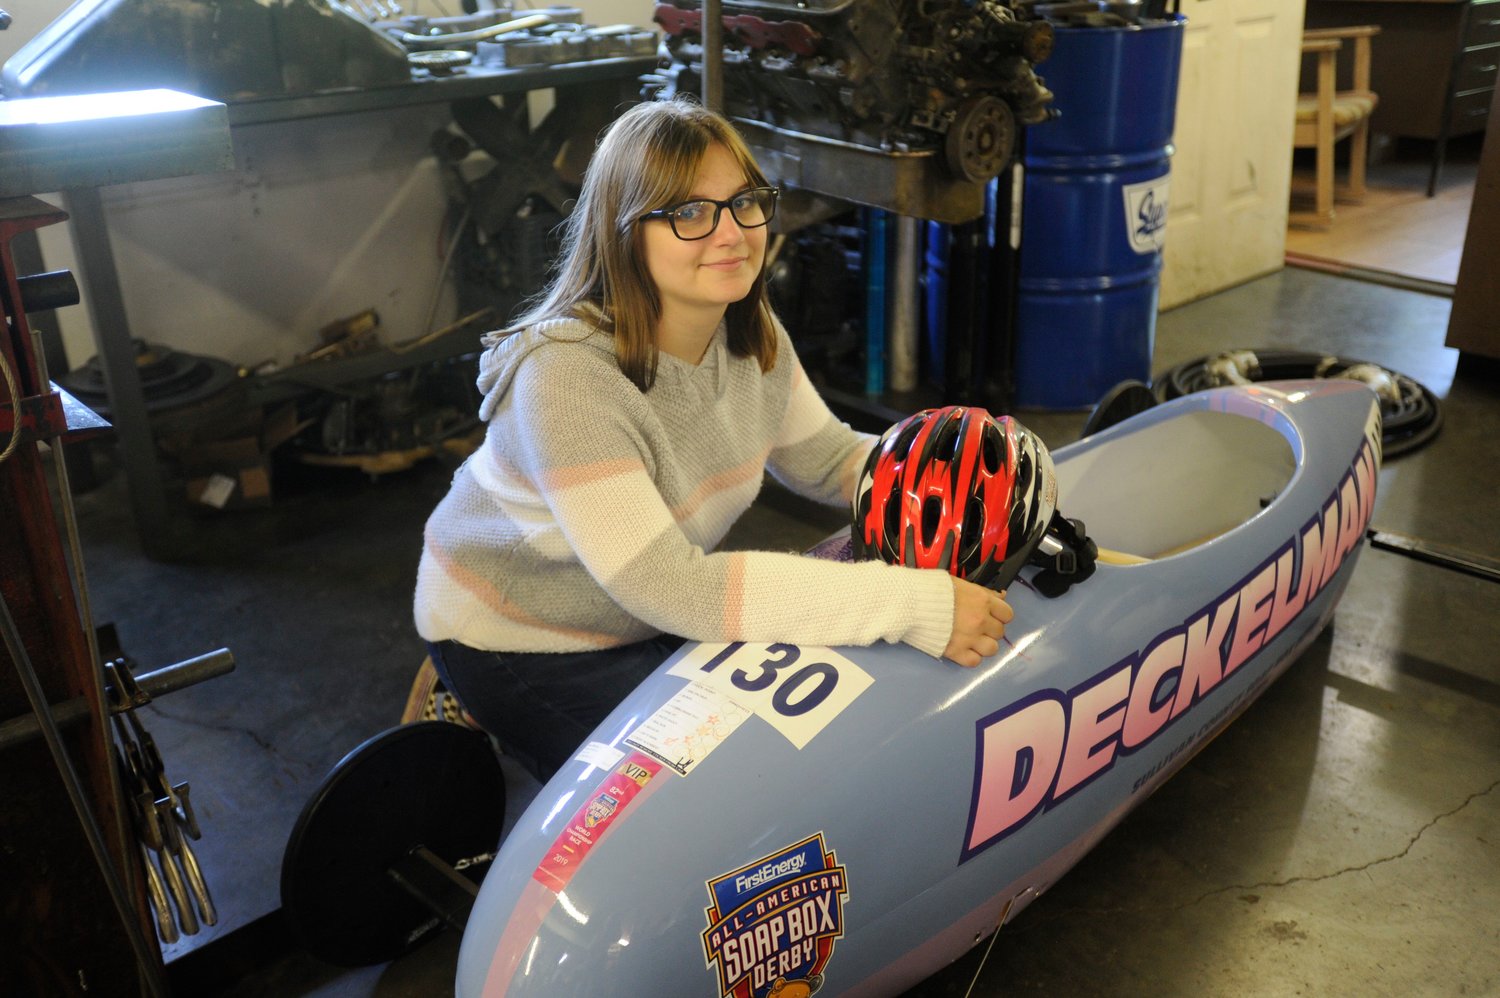 Past glories. Monika Deckelman poses in her dad’s machine shop with her Soap Box Derby racer. Last year, she finished 10th in her division at the Soap Box Derby Nationals in Akron, OH.